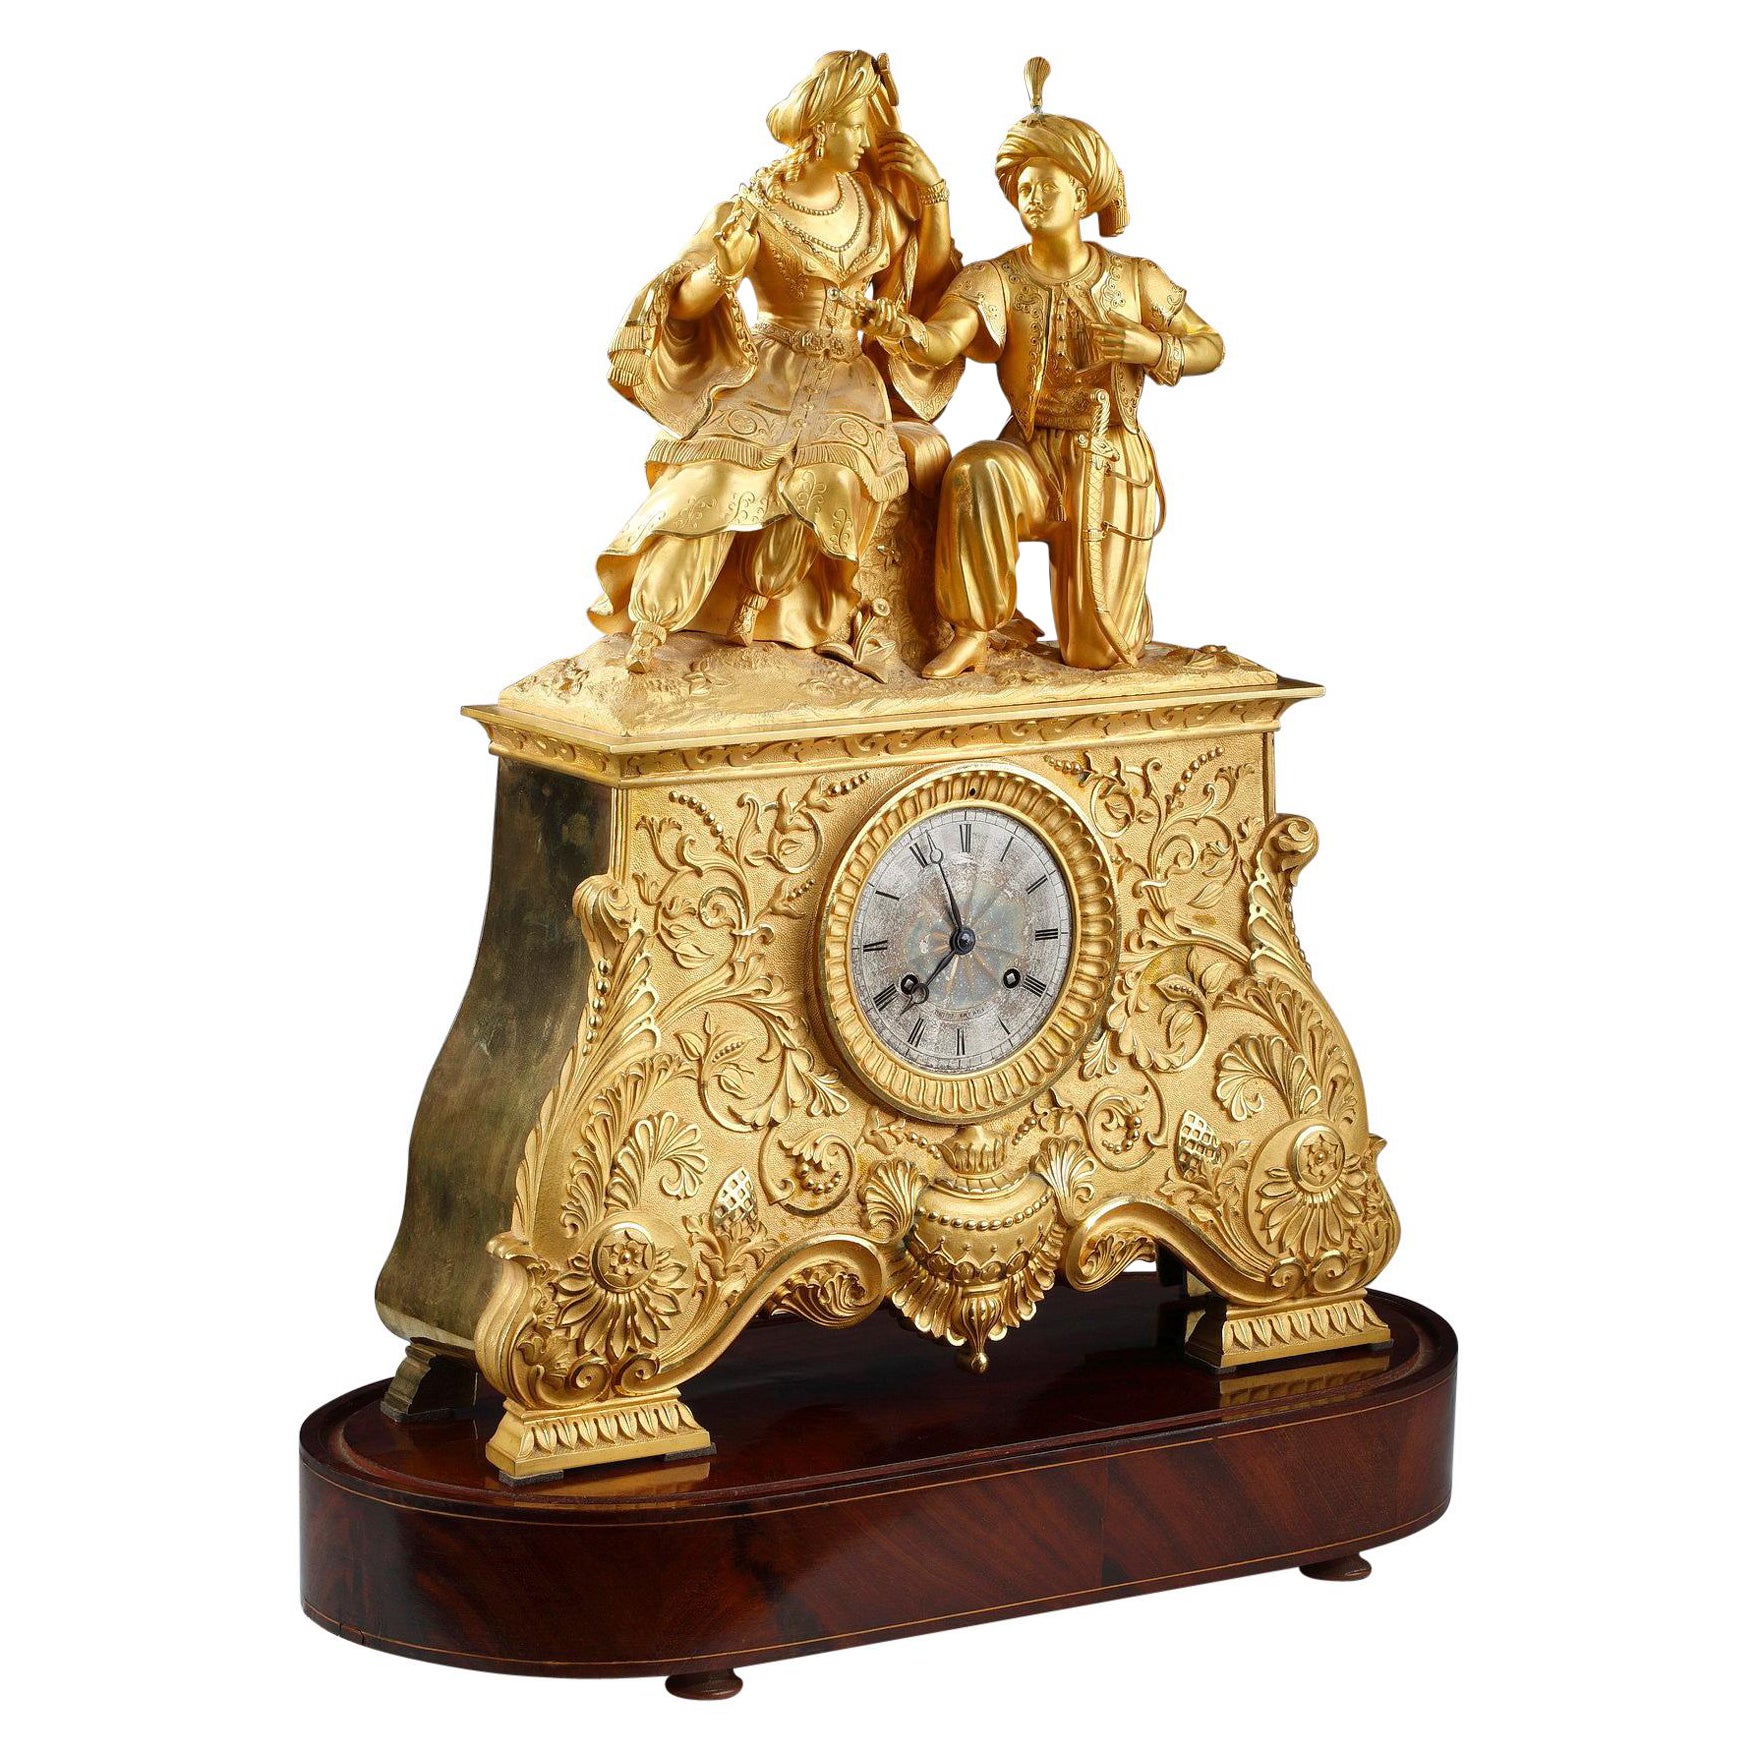 Leila and the Giaour Gilded Bronze Clock, France, Circa 1830